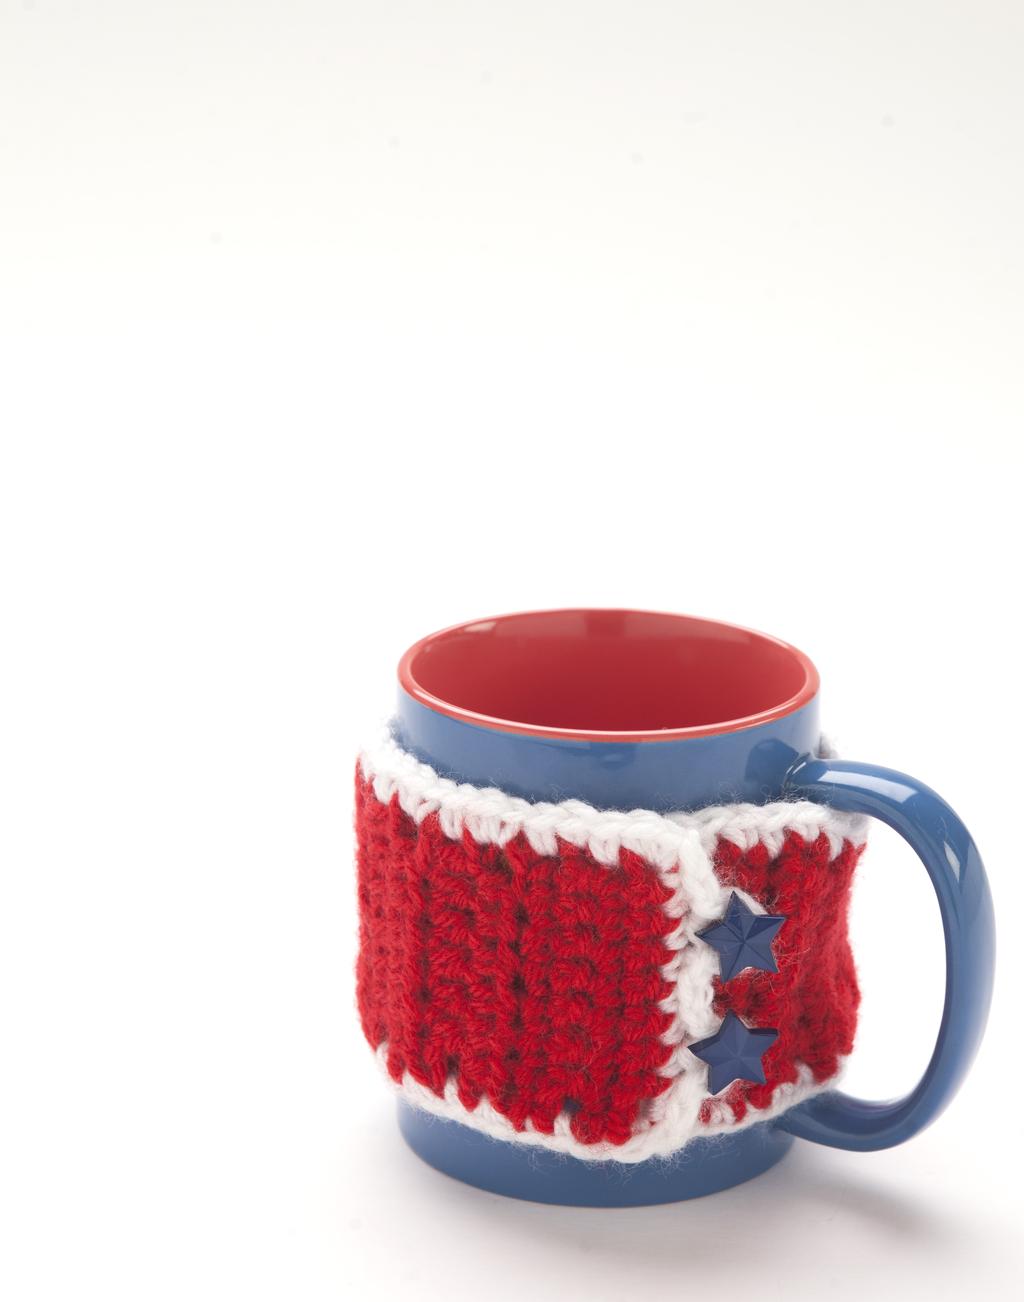 LEARN TO CROCHET YOUR FIRST PROJECT! MUG COZY Finished Size: Approximately 2¾" high x 12" long (7 cm x 30.